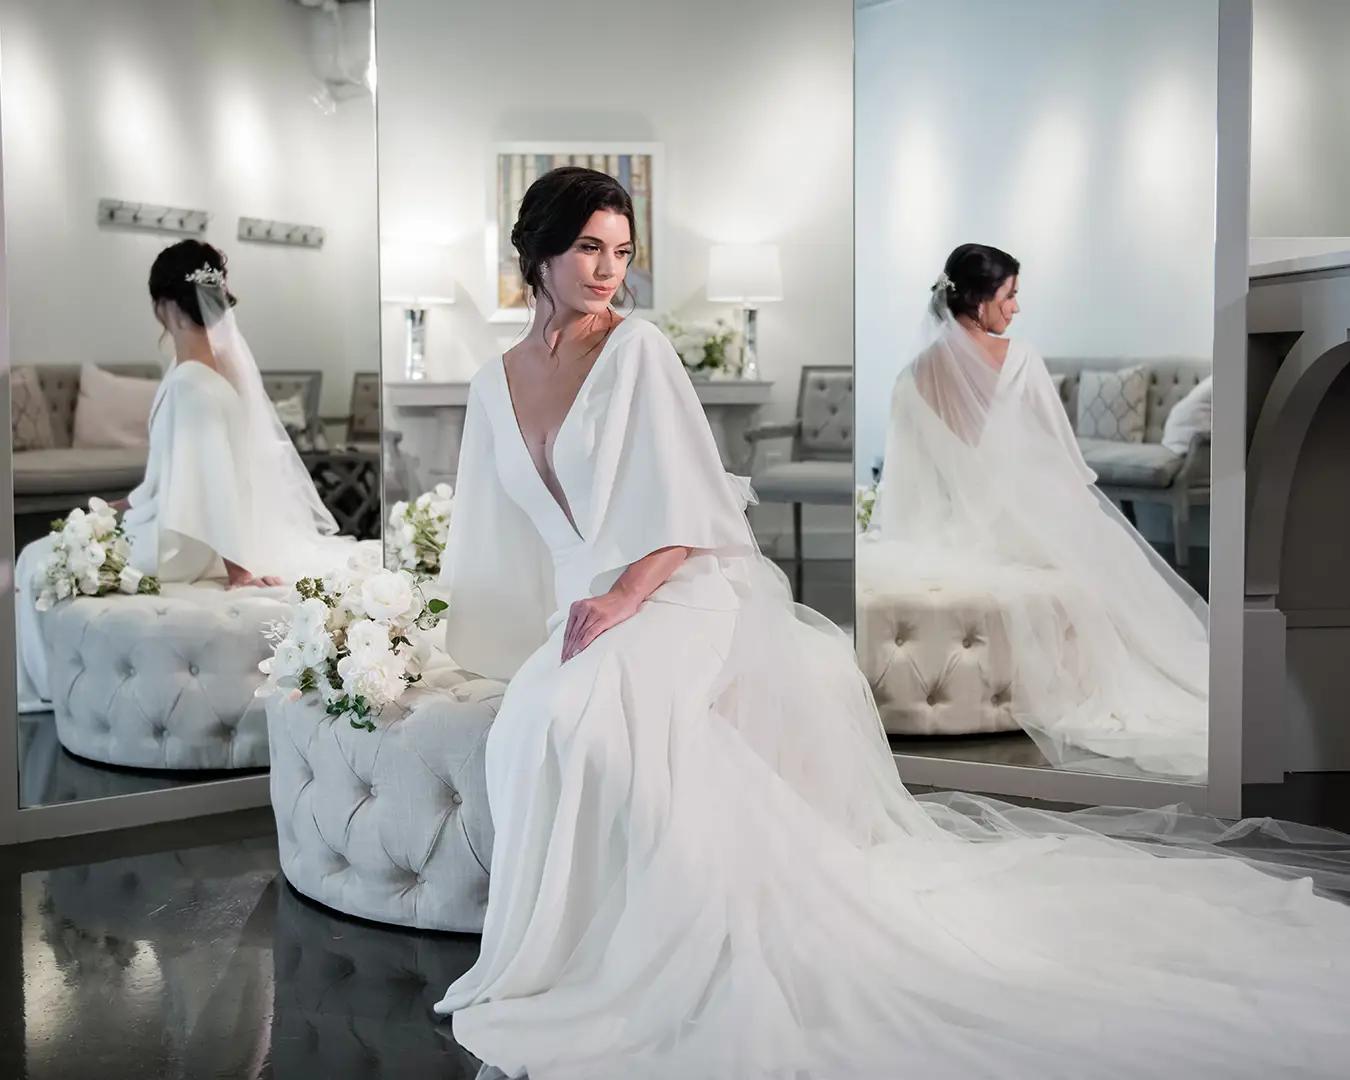 How to Spice Up a Simple Wedding Dress Image